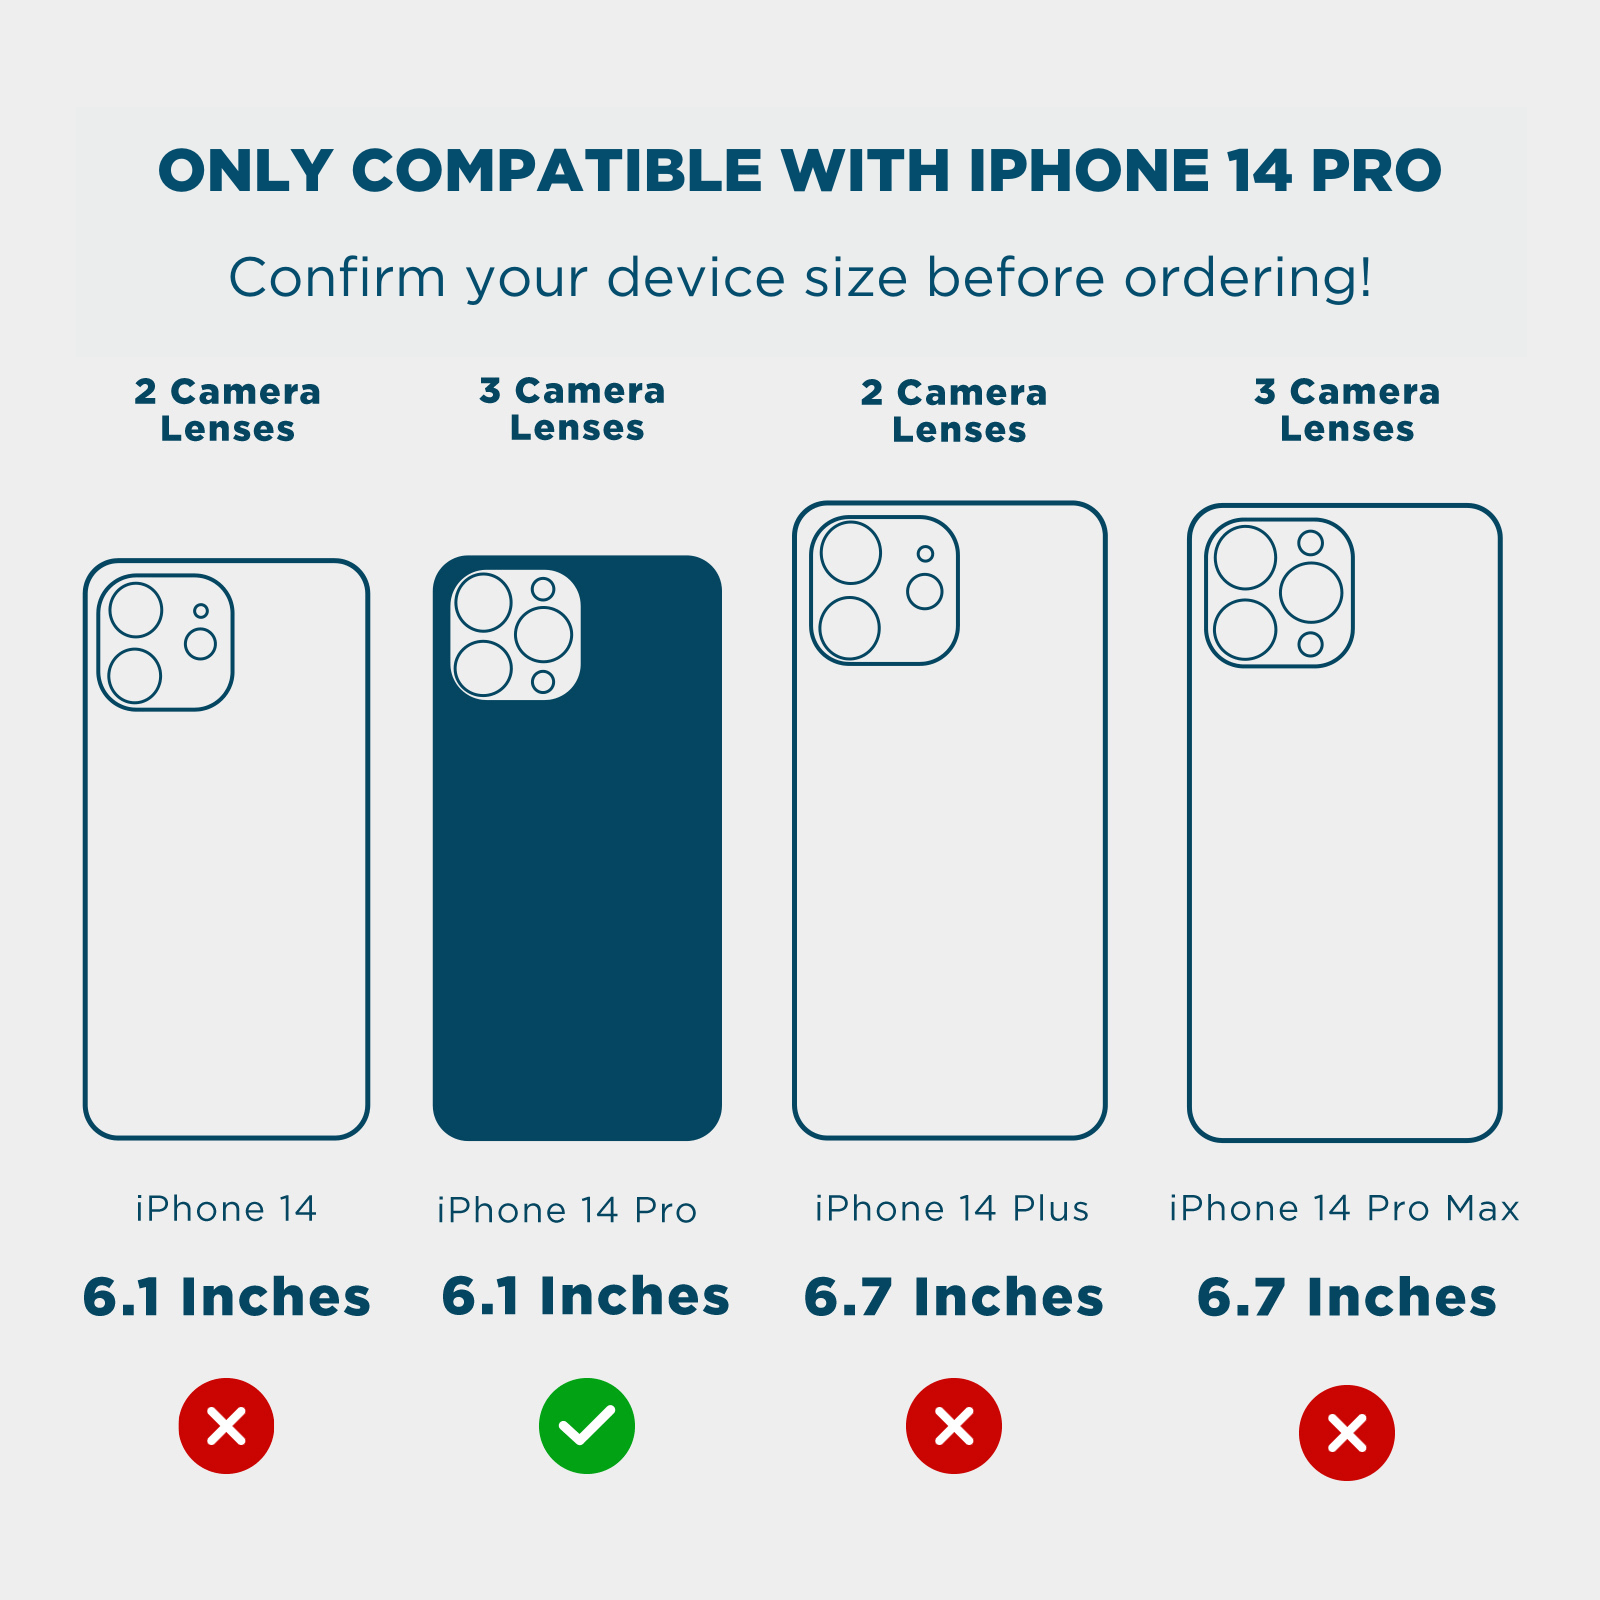 ONLY COMPATIBLE WITH IPHONE 14 PRO. CONFIRM YOUR DEVICE SIZE BEFORE ORDERING. 2 CAMERA LENSES, 3 CAMERA LENSES, 2 CAMERA LENSES, 3 CAMERA LENSES, 6.1, 6.1, 6.7, 6.7. COLOR::GOLD